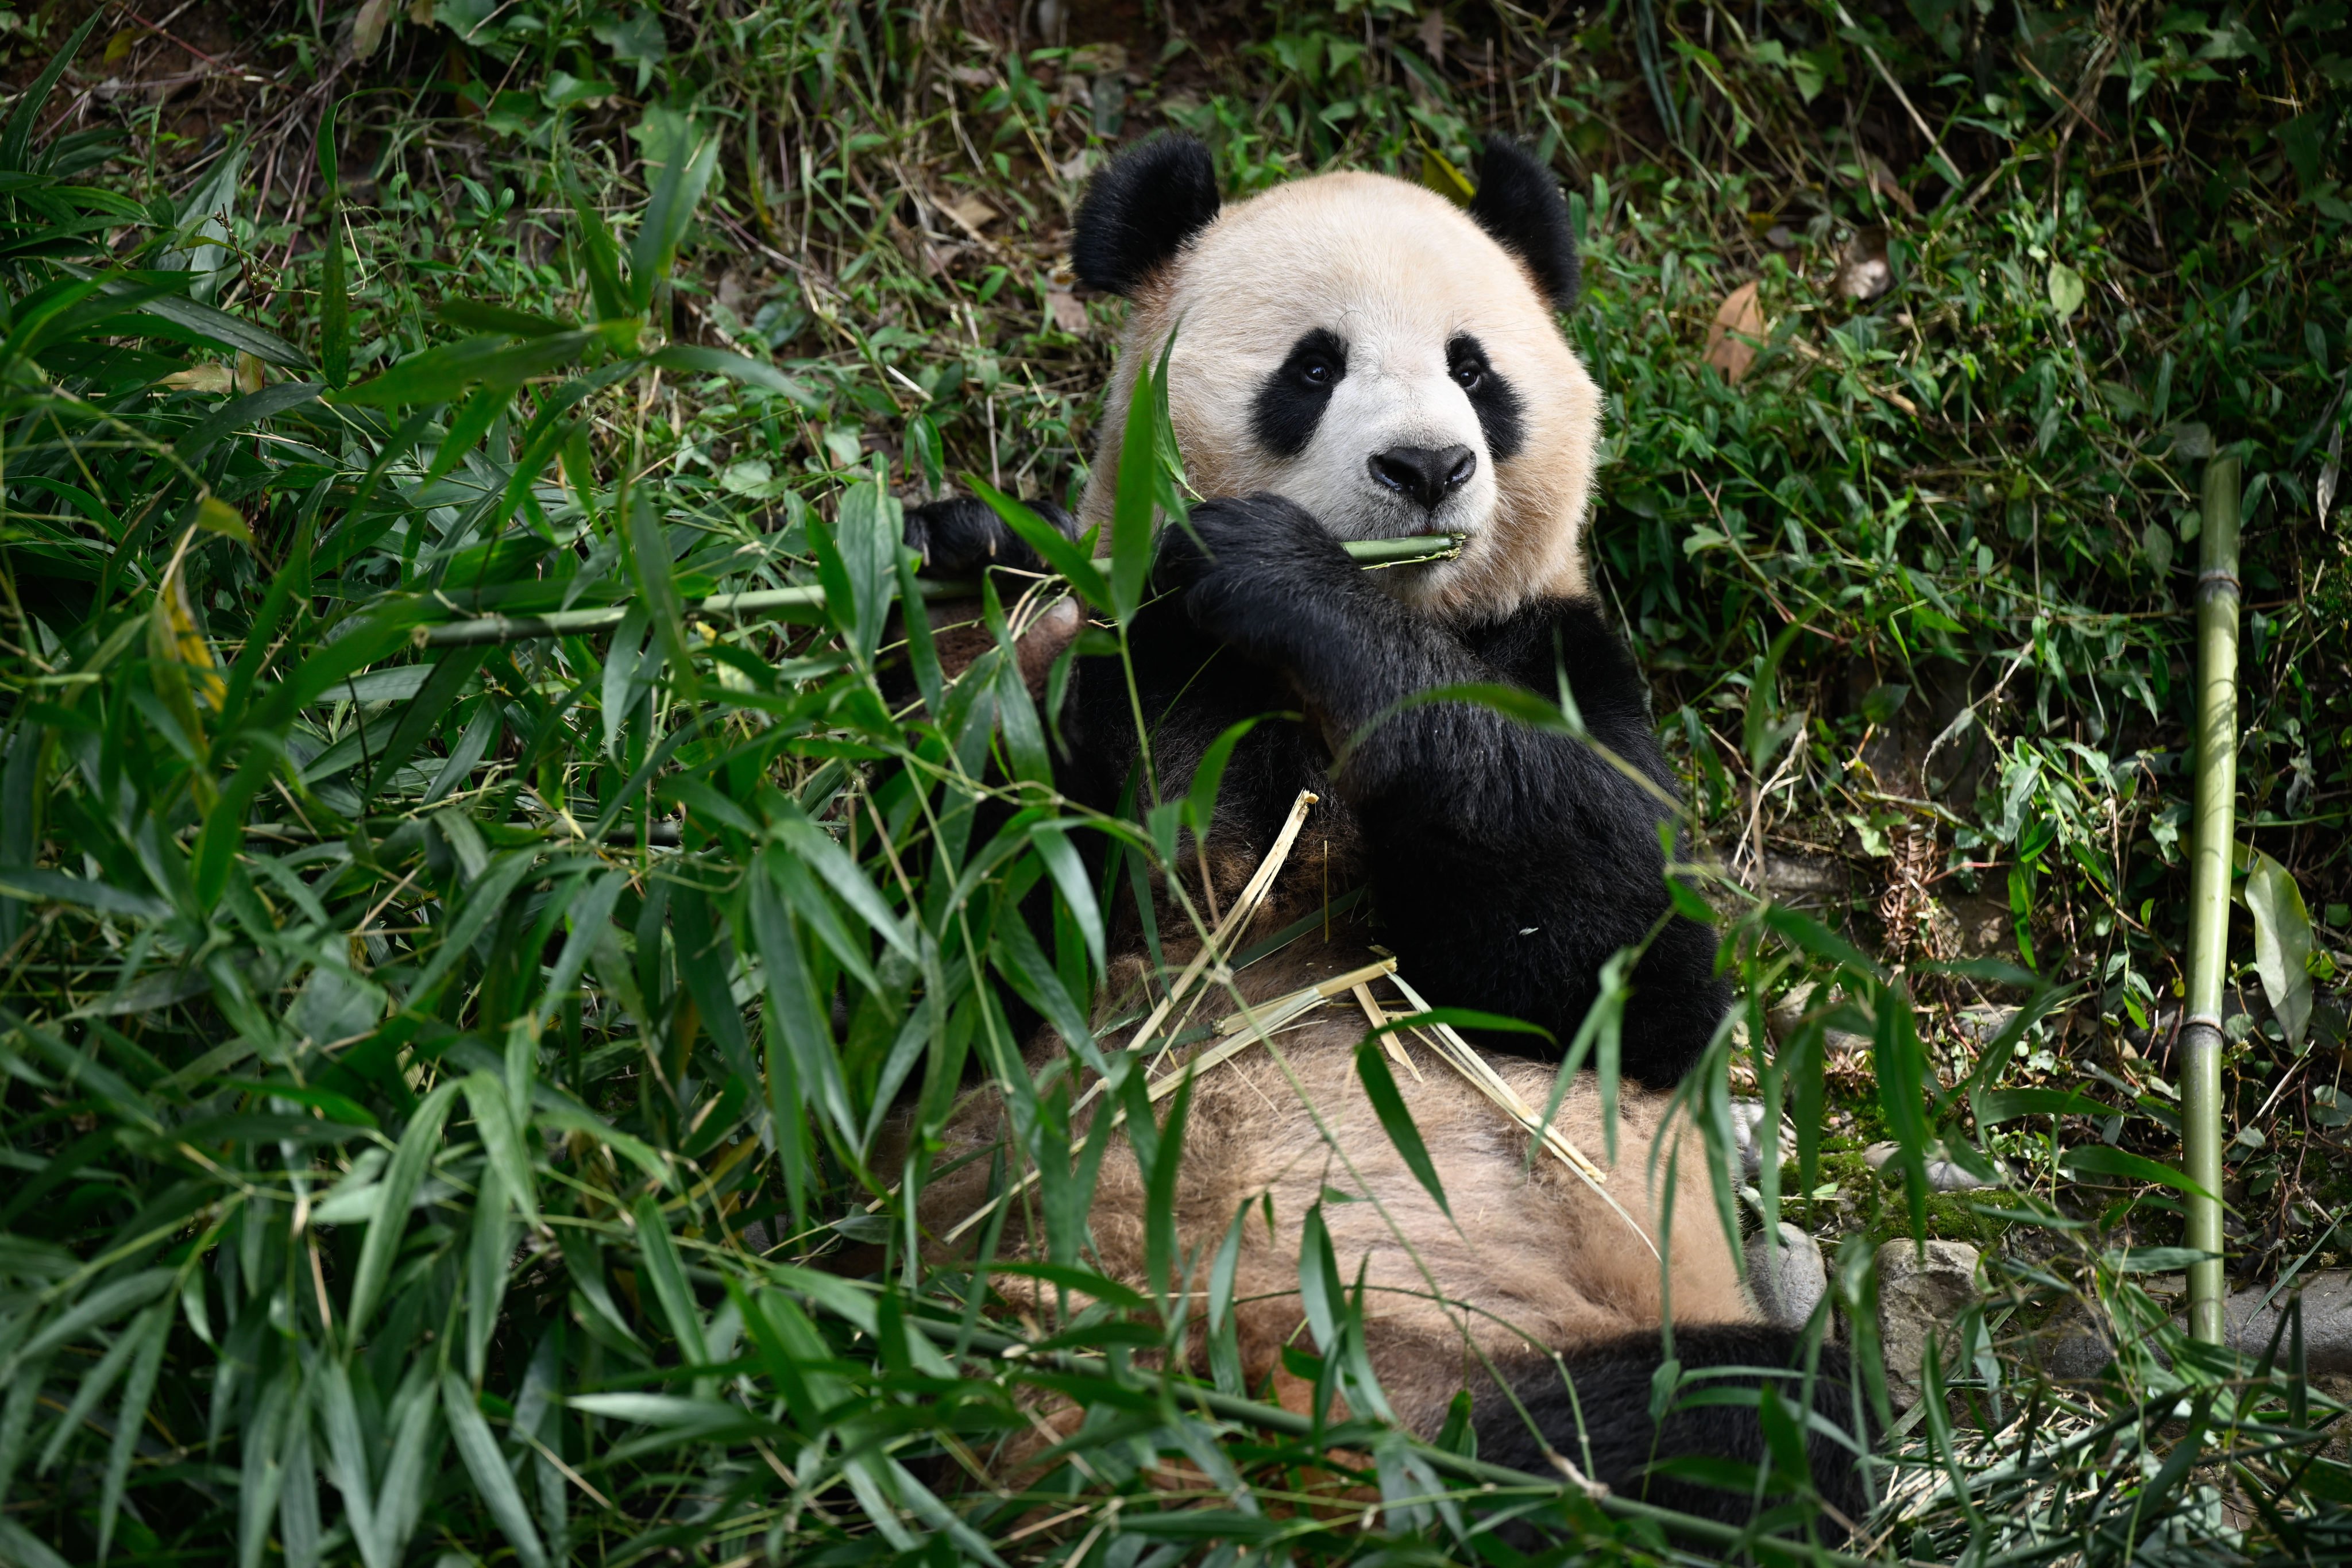 Bamboo is not just the food of the giant panda; it also provides a long list of health benefits for human consumption. Photo: Xinhua